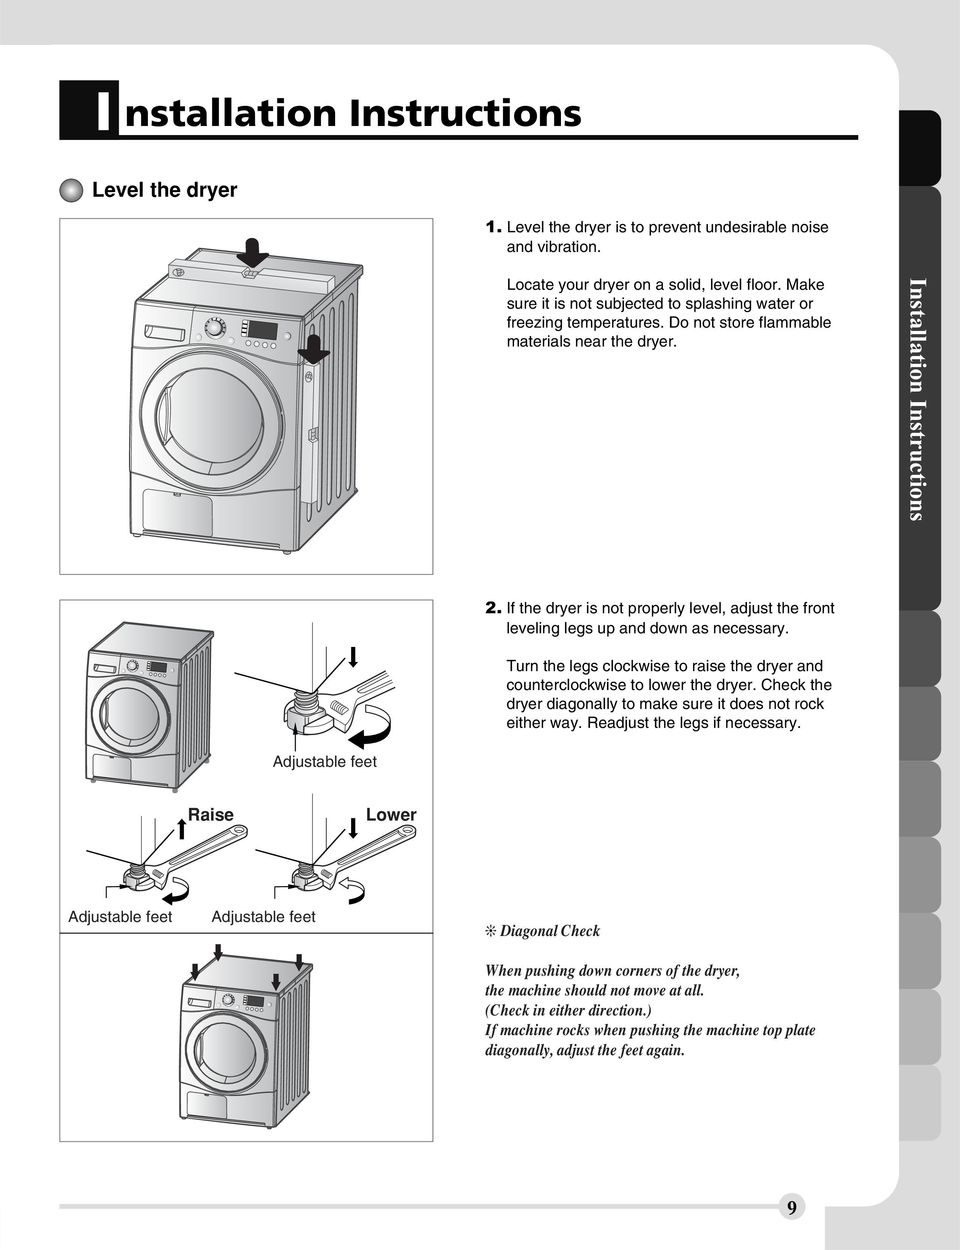 If the dryer is not properly level, adjust the front leveling legs up and down as necessary. Turn the legs clockwise to raise the dryer and counterclockwise to lower the dryer.